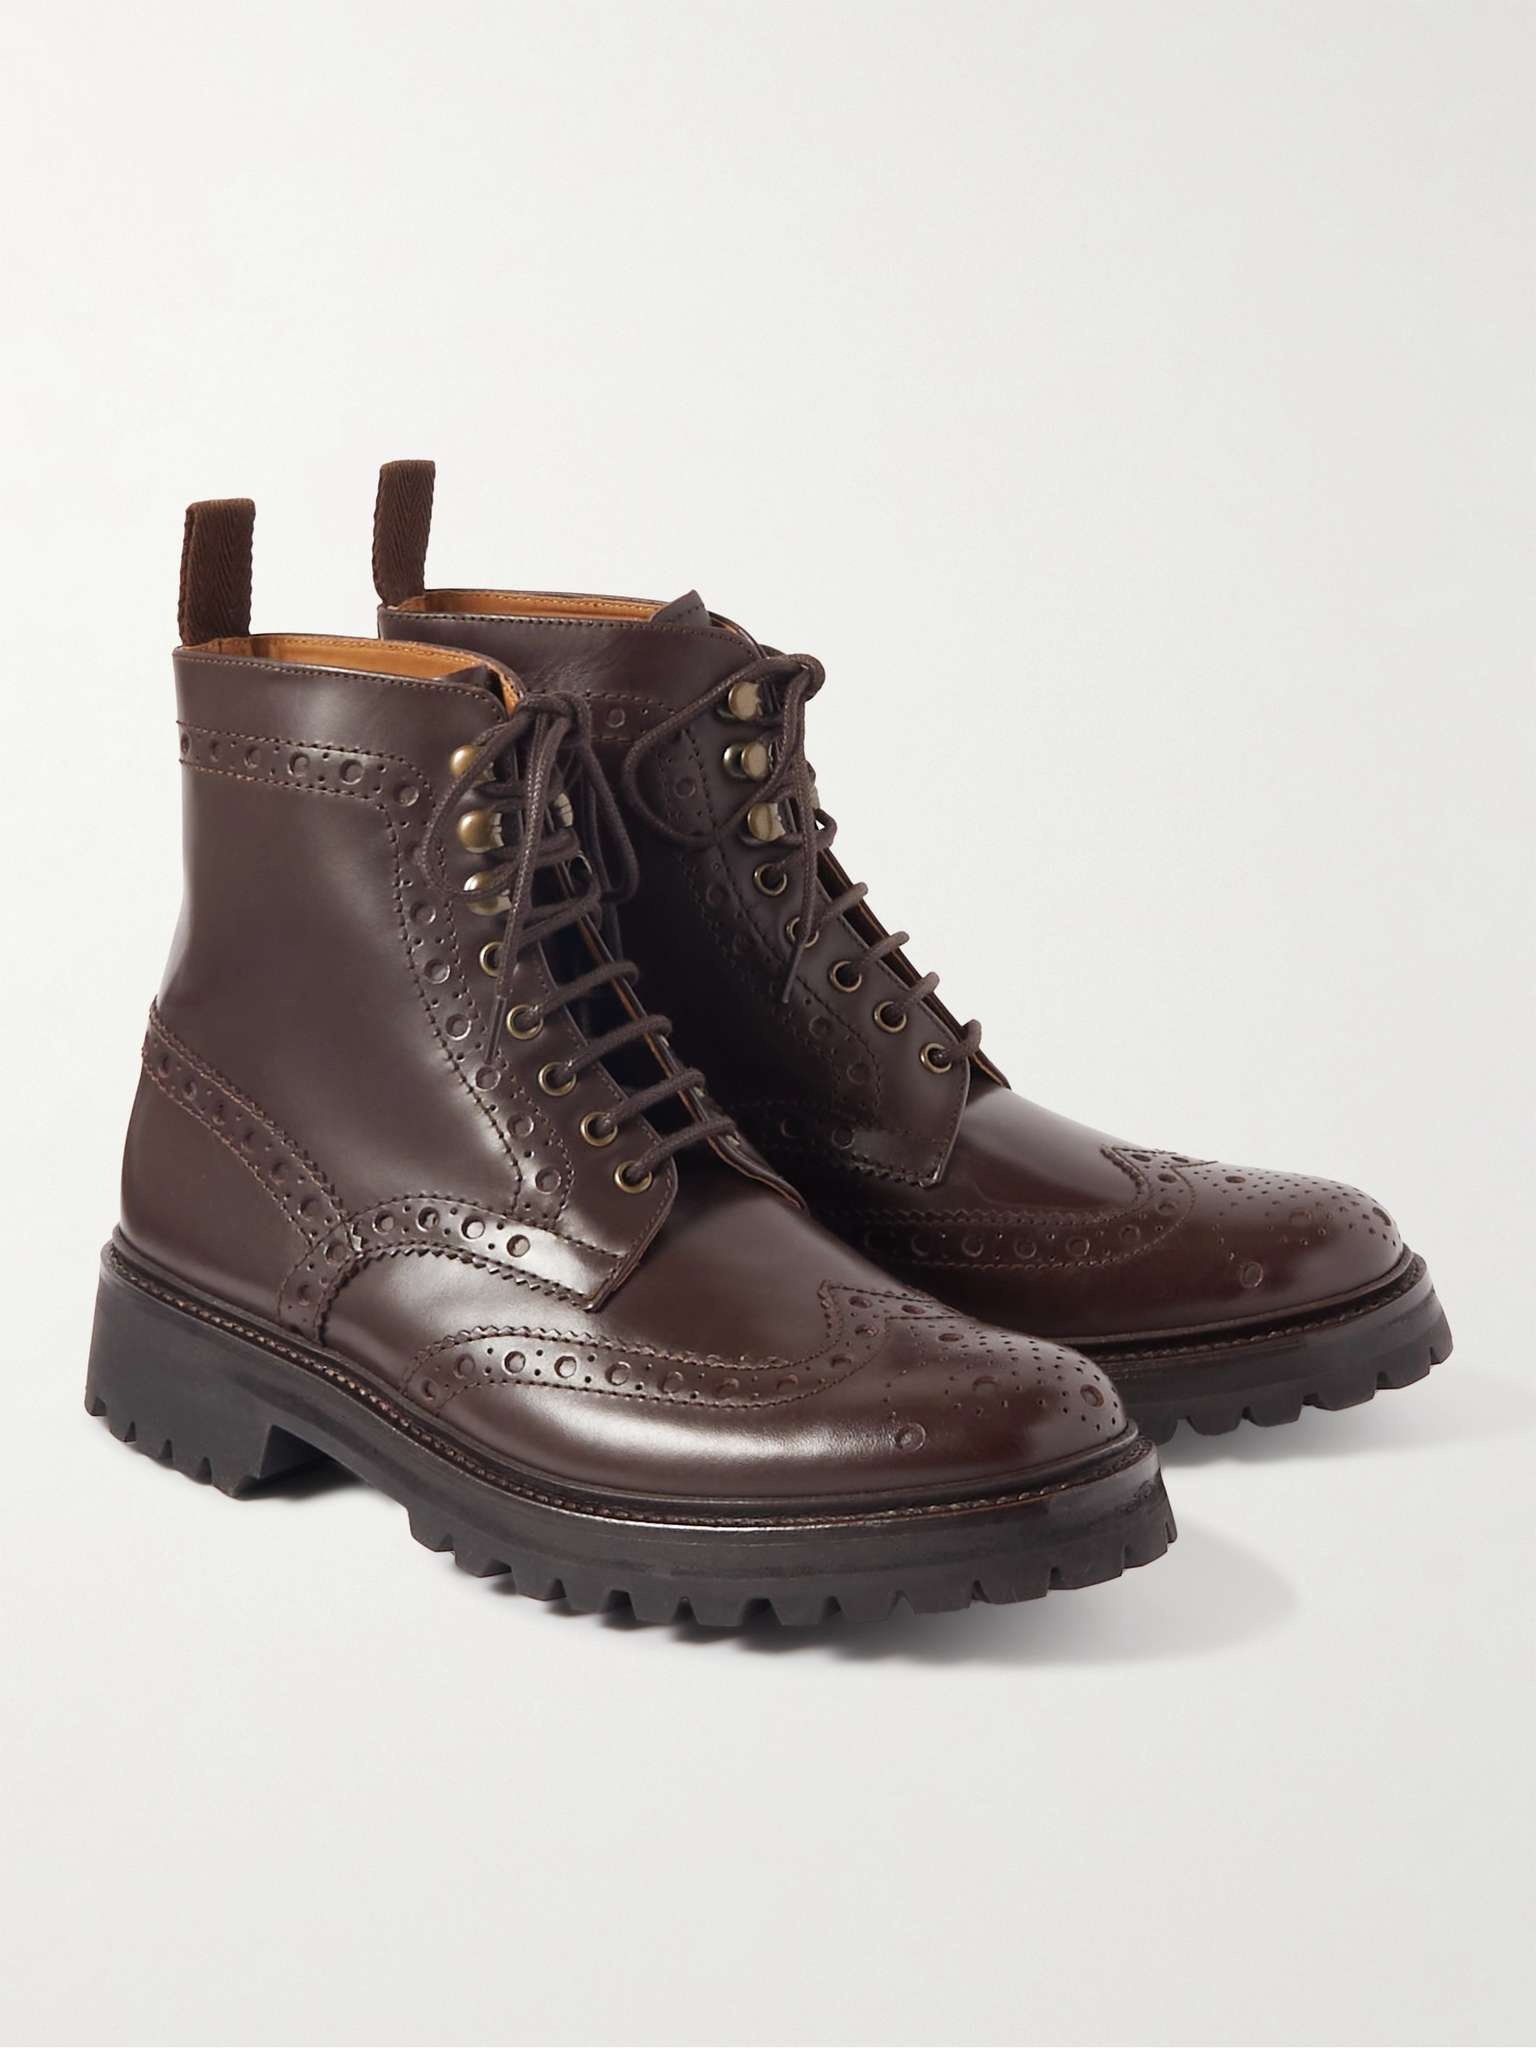 Fred Leather Brogue Boots - 4